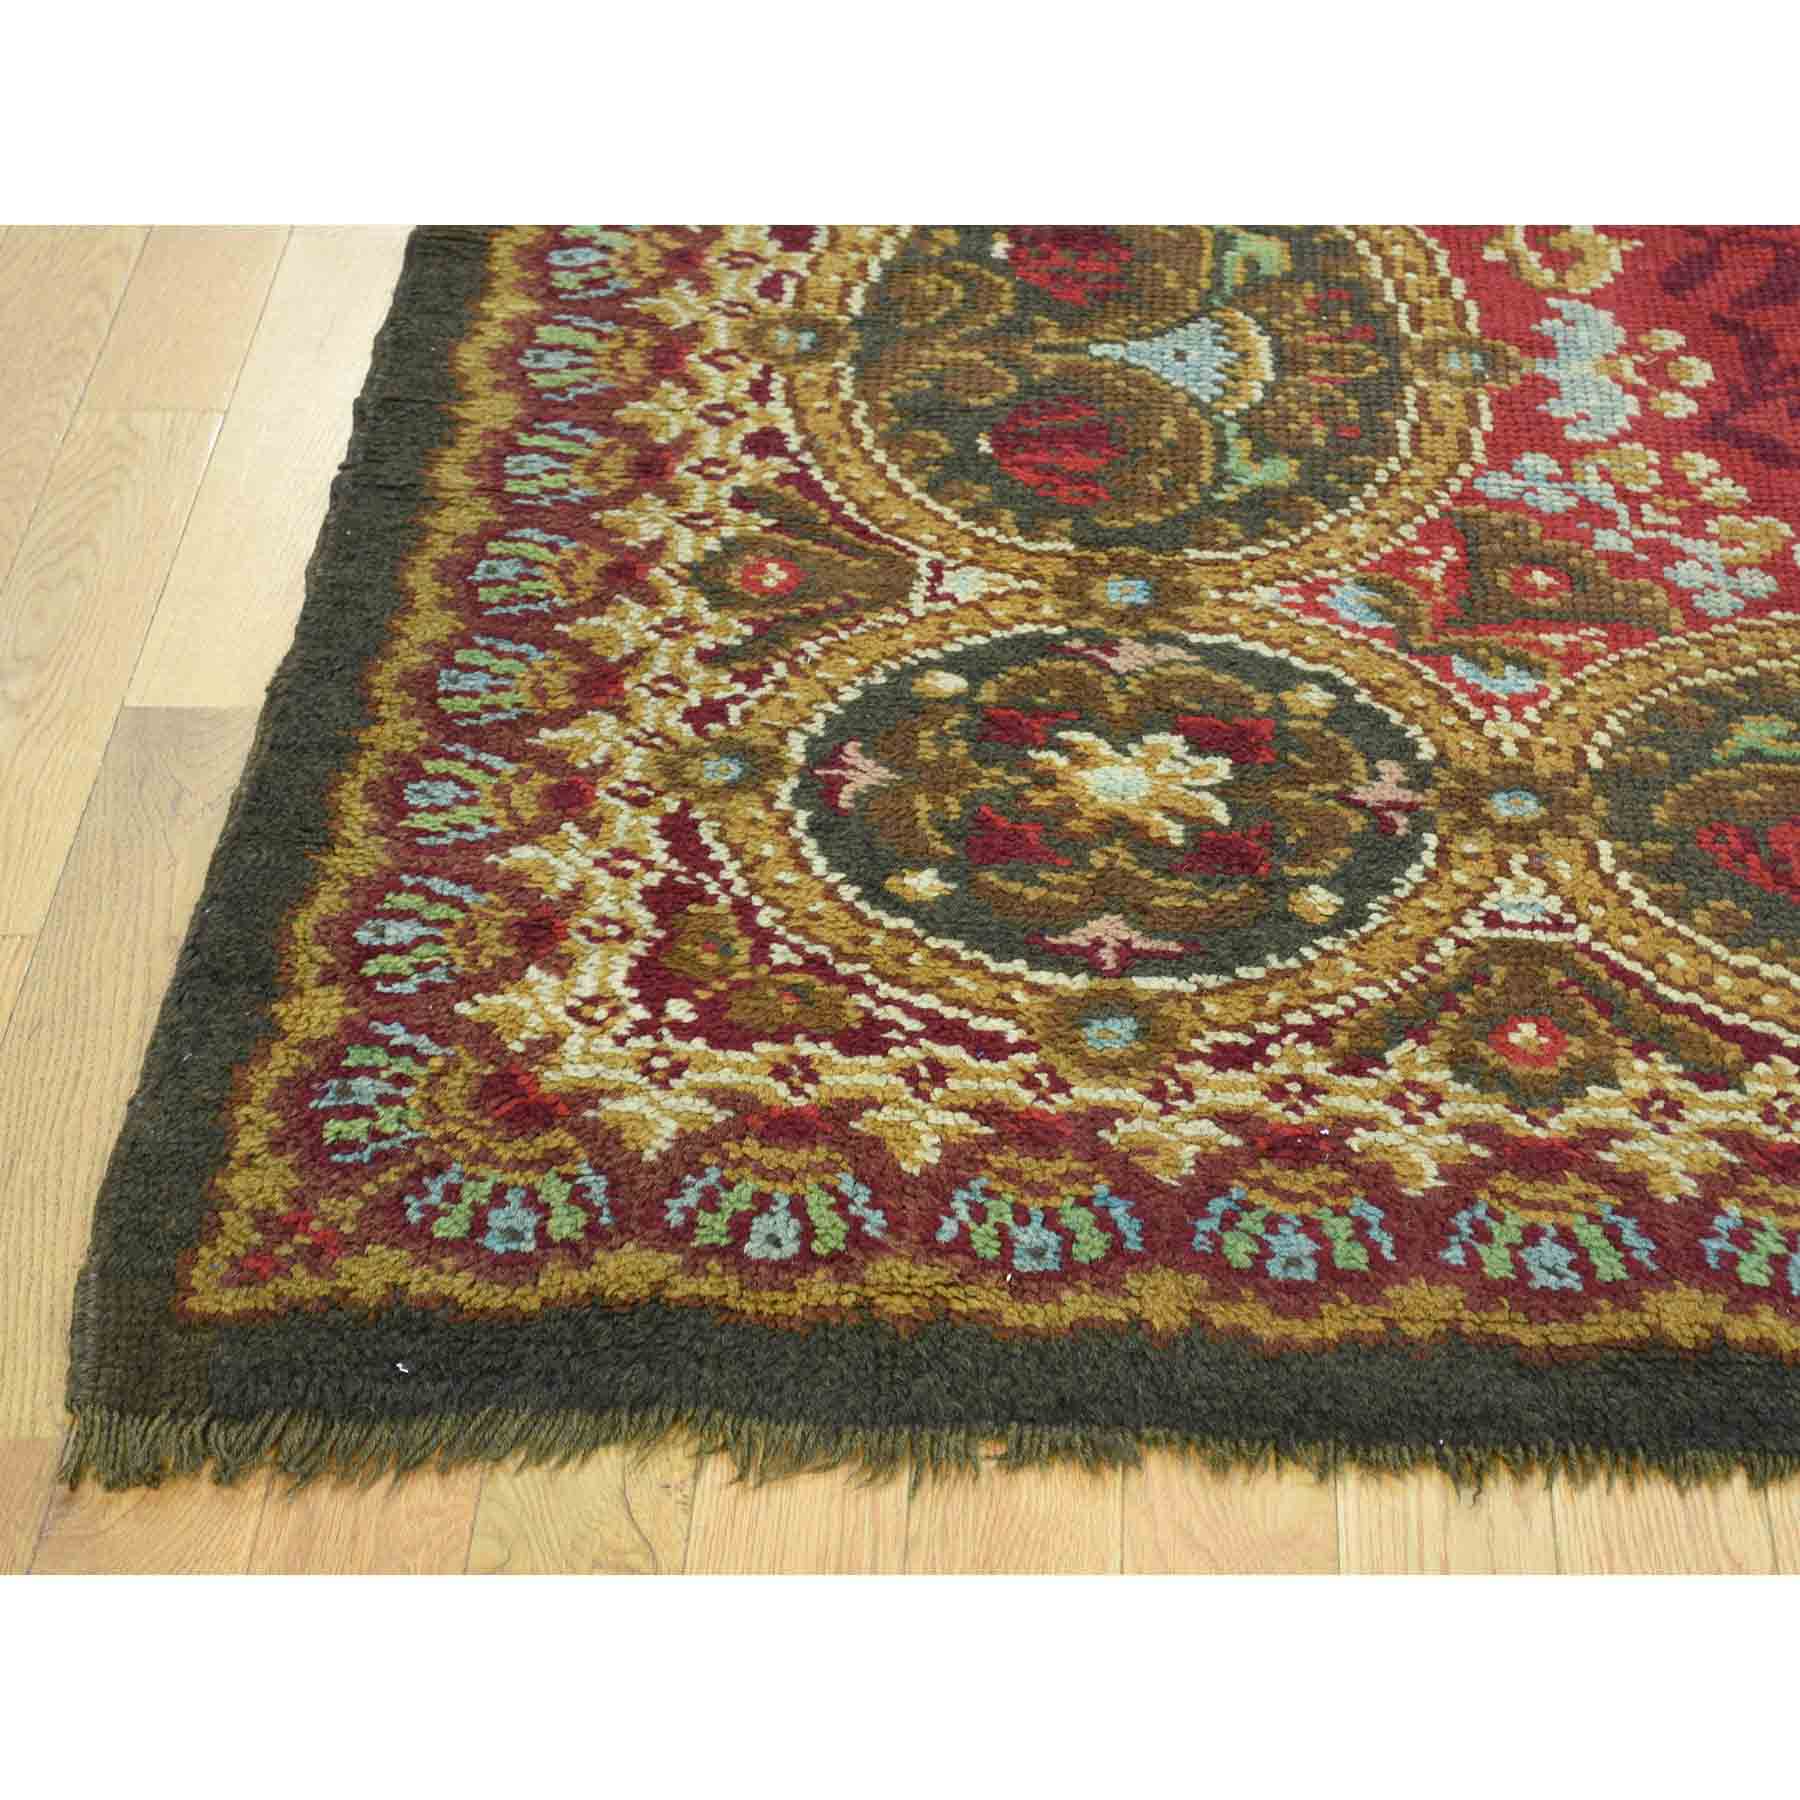 Antique-Hand-Knotted-Rug-160105